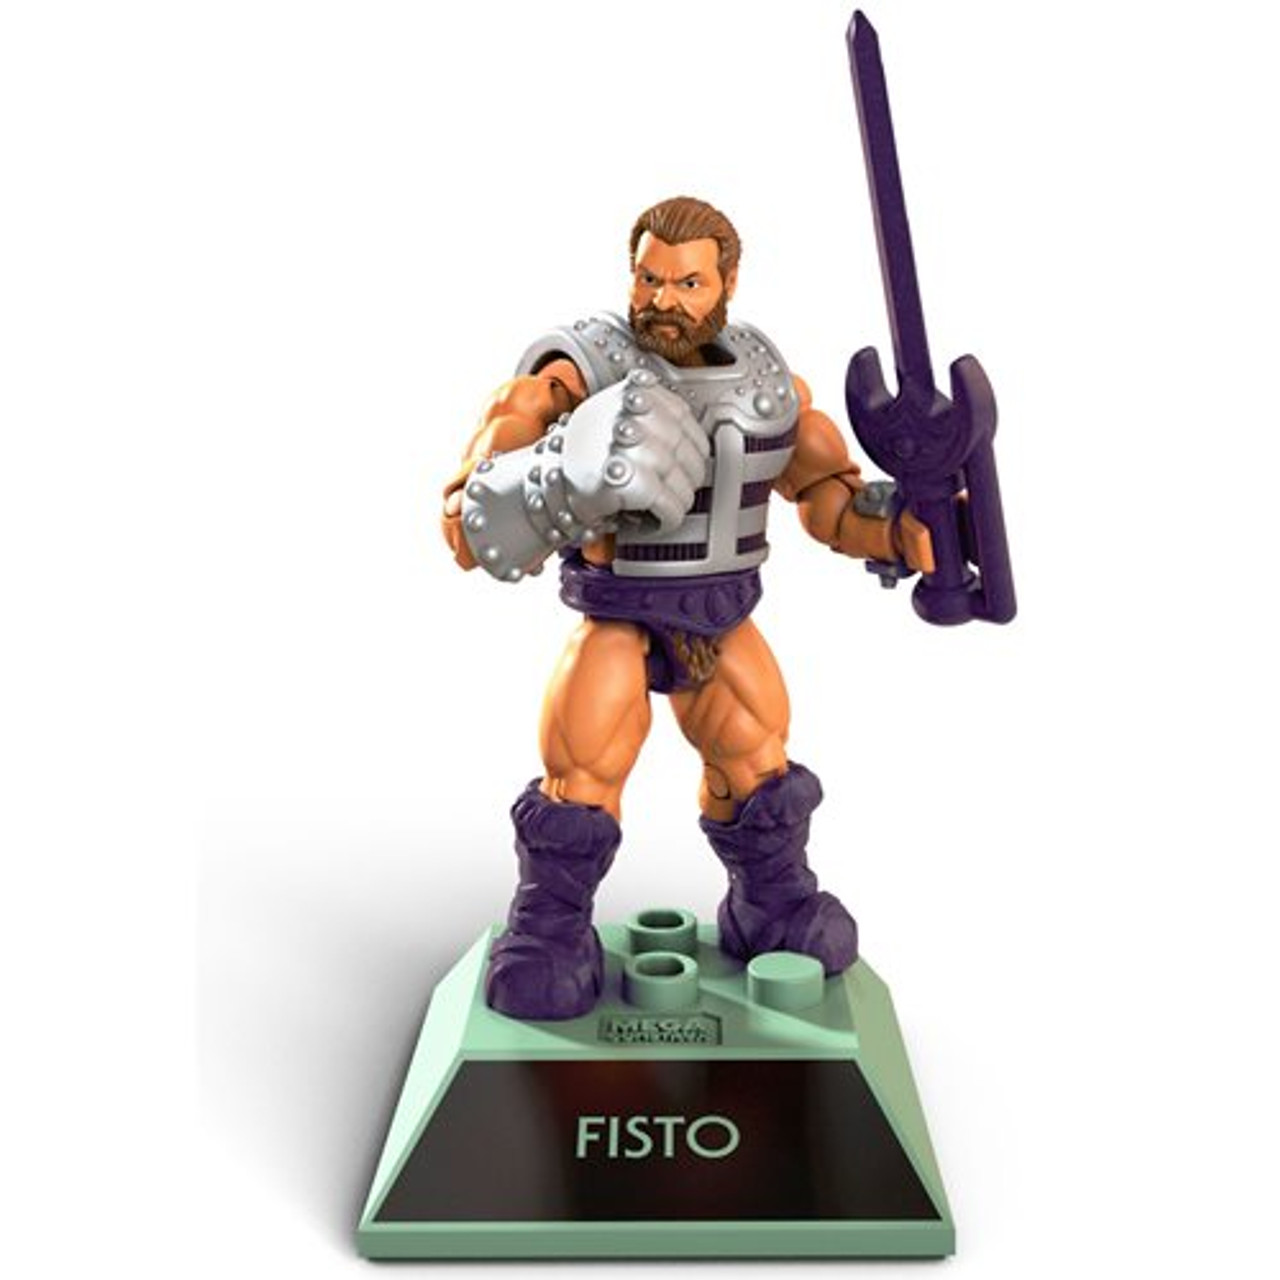 MEGA CONSTRUX MASTERS OF THE UNIVERSE MOTU Heroes Wave 4 FISTO IN STOCK! 